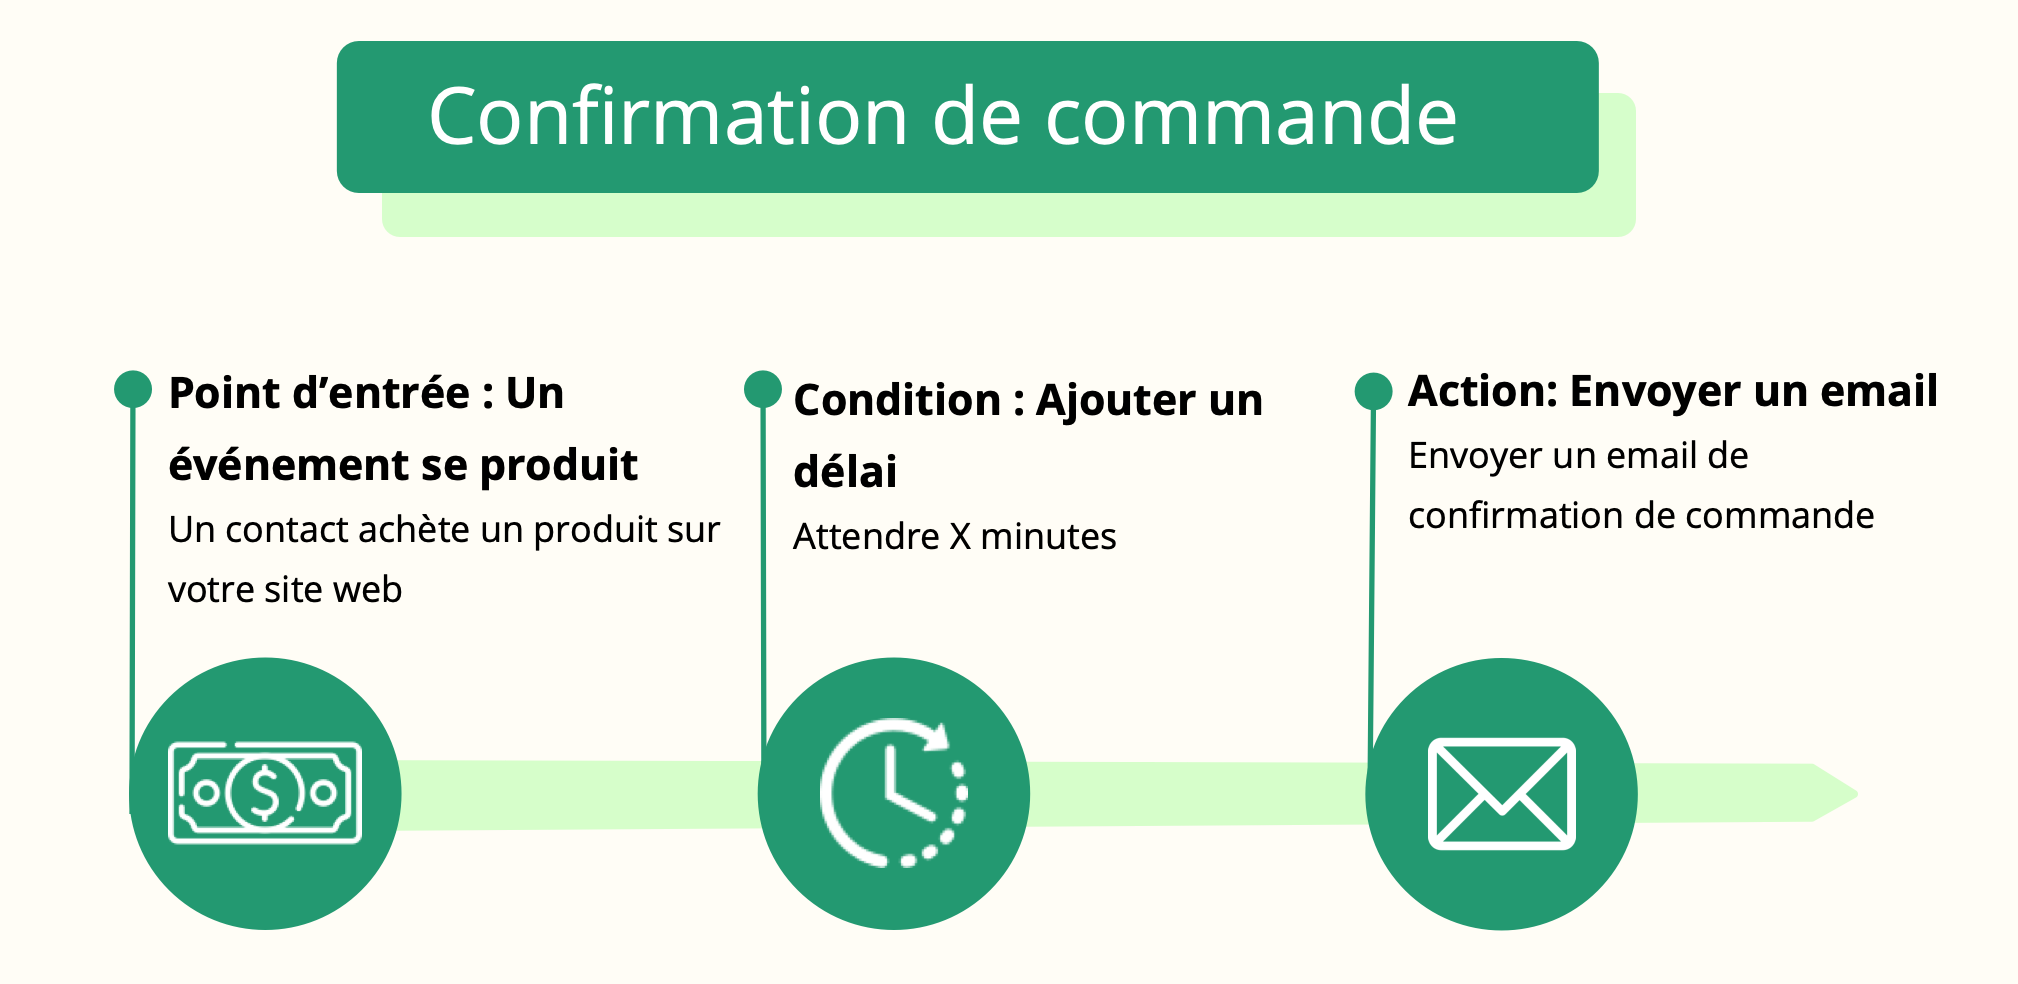 automations_order-confirmation-workflow_FR.png